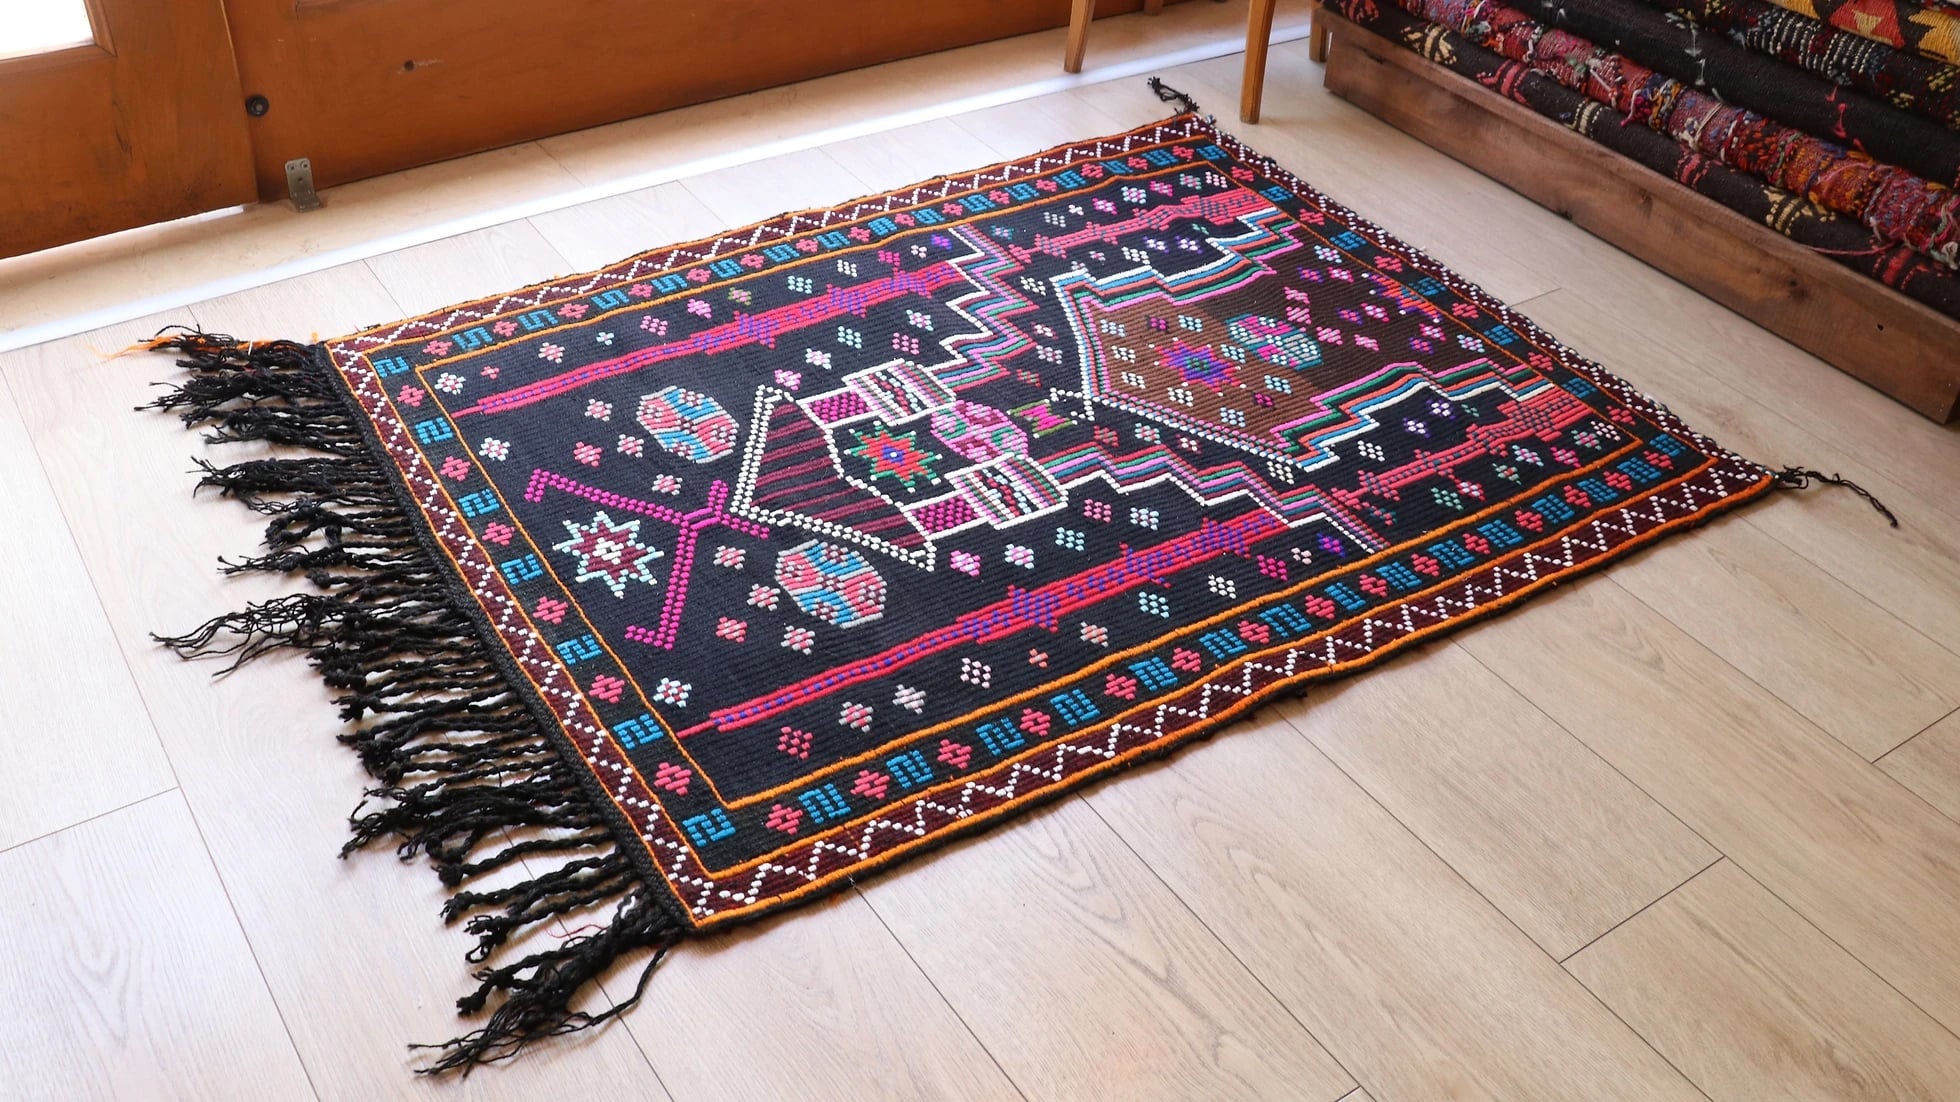 vintage handwoven Cecim Kilim prayer small area rug in gorgeous fuchsia and amethyst colors with black tassels